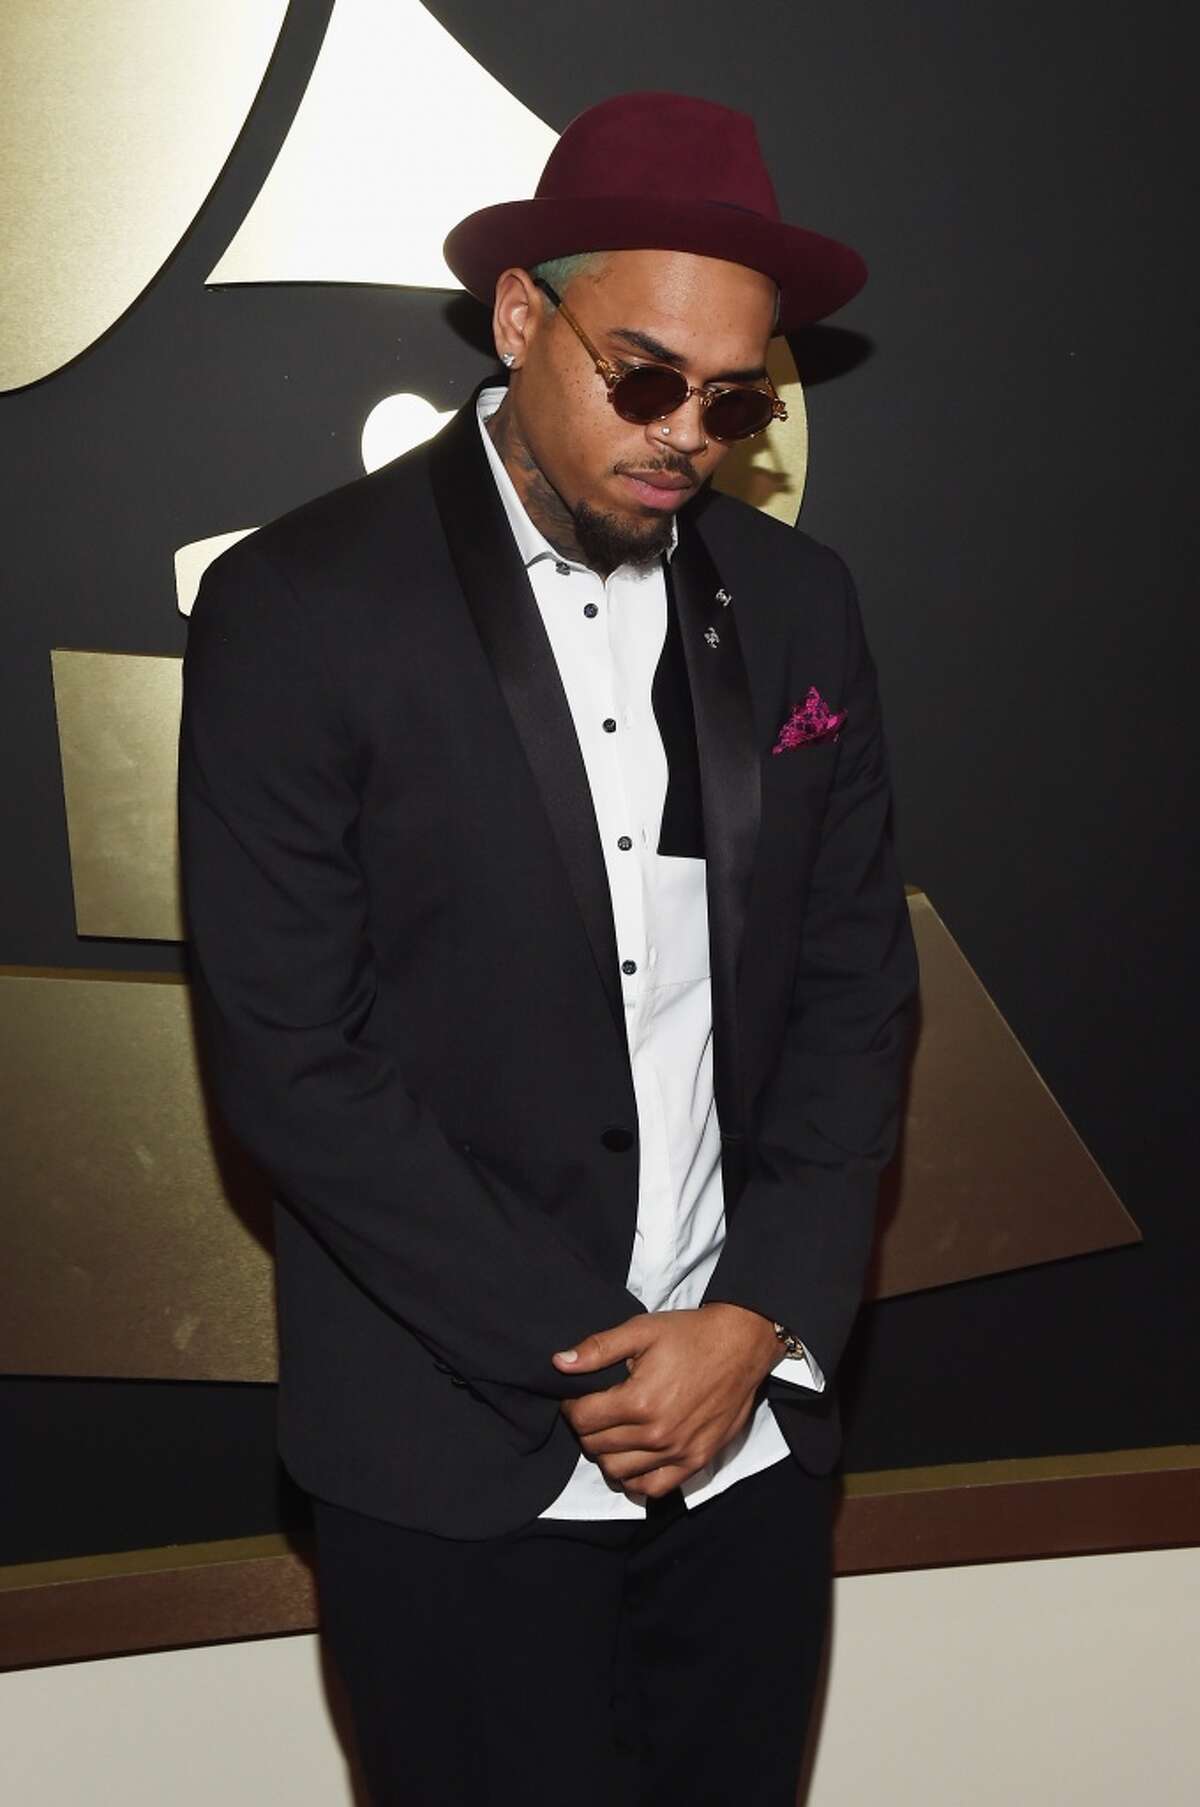 Recording Artist Chris Brown attends The 57th Annual GRAMMY Awards at the STAPLES Center on February 8, 2015 in Los Angeles, California.